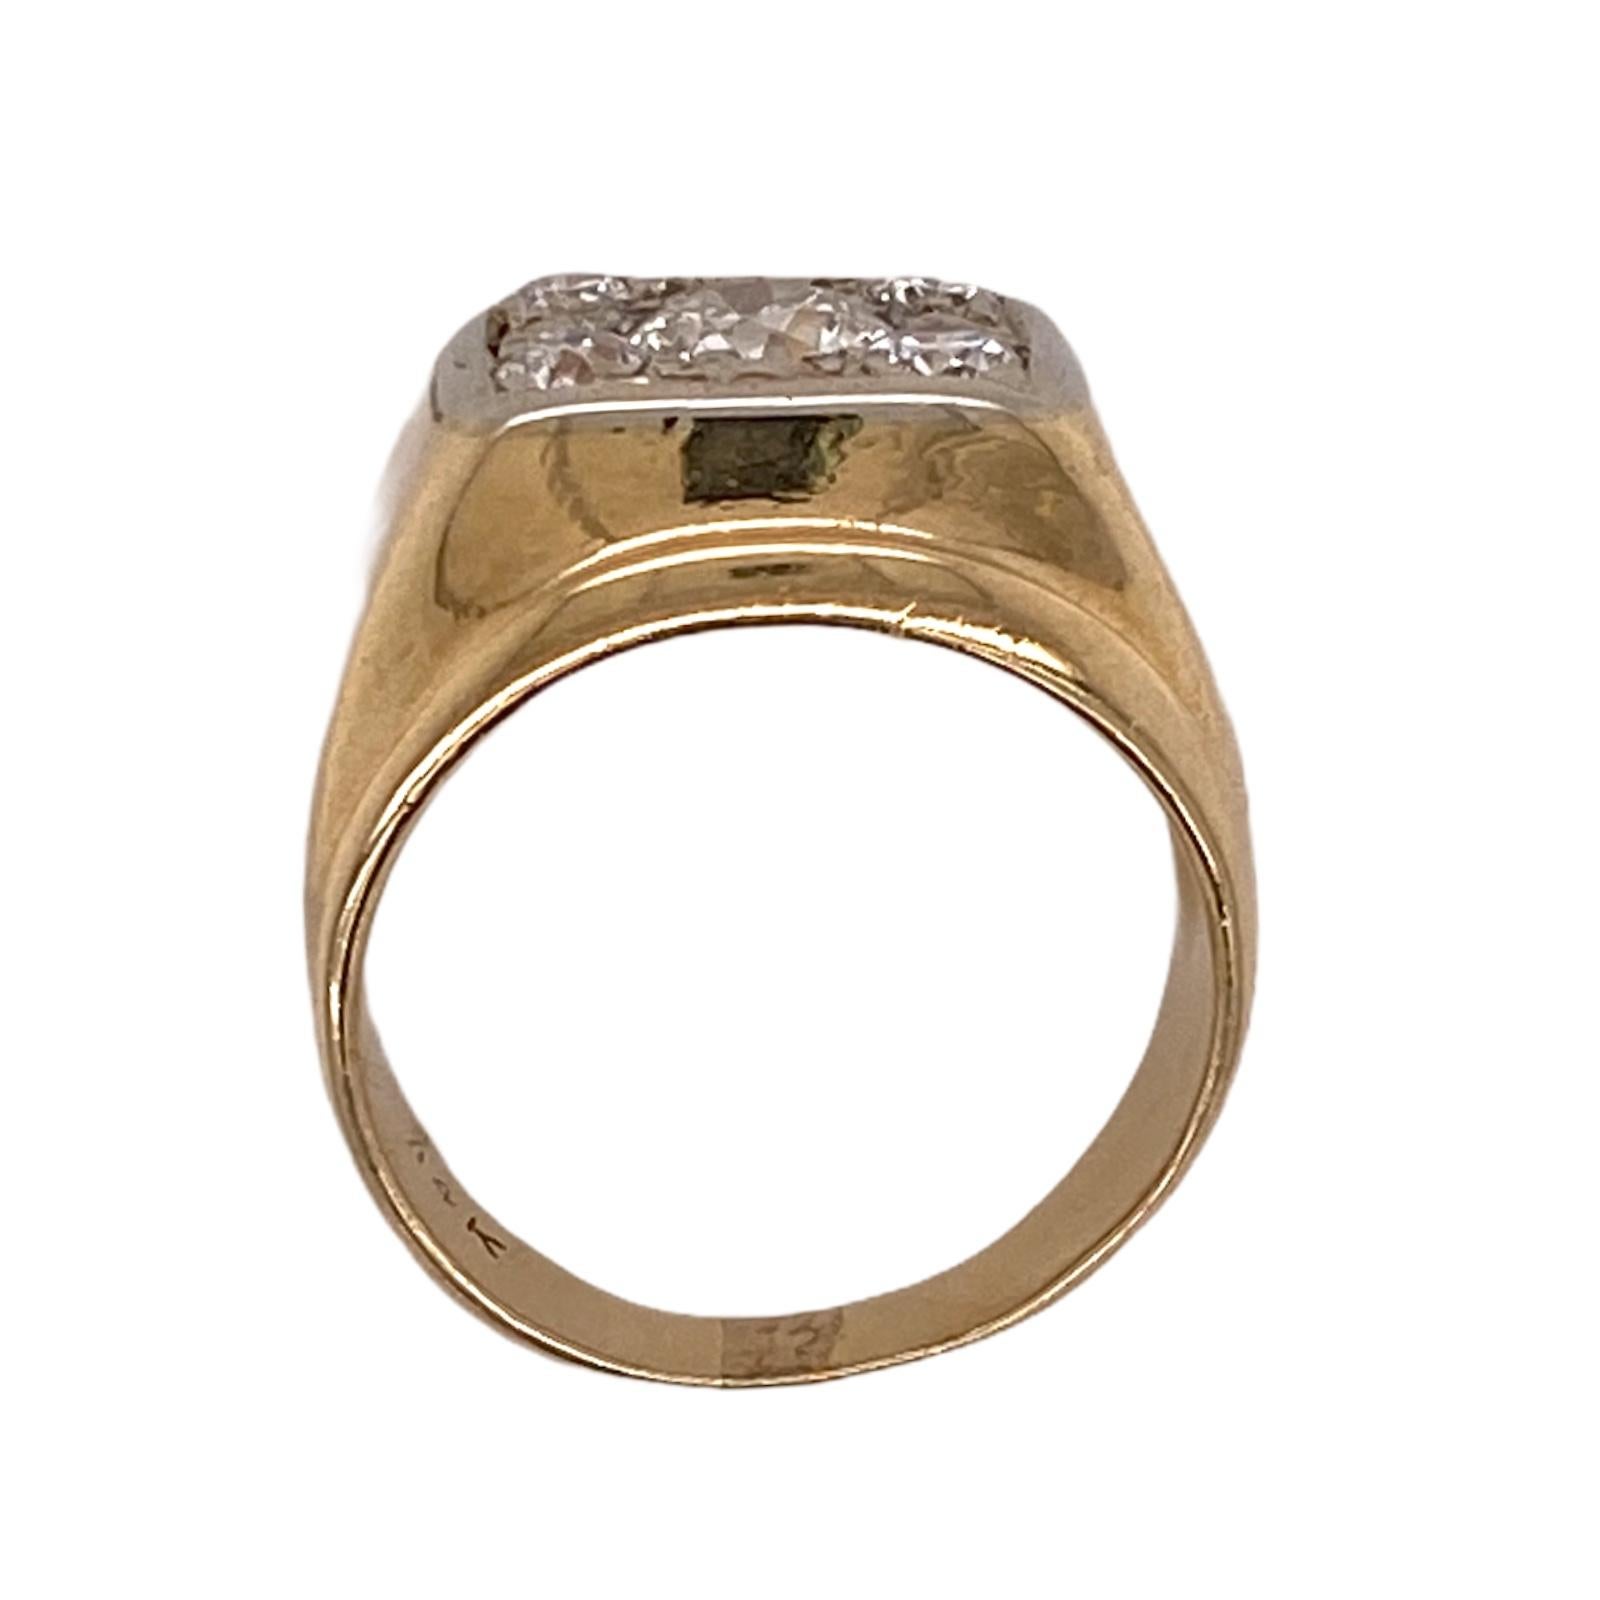 Contemporary 1960s Old European Cut Diamond 14 Karat Yellow Gold Vintage Ring For Sale